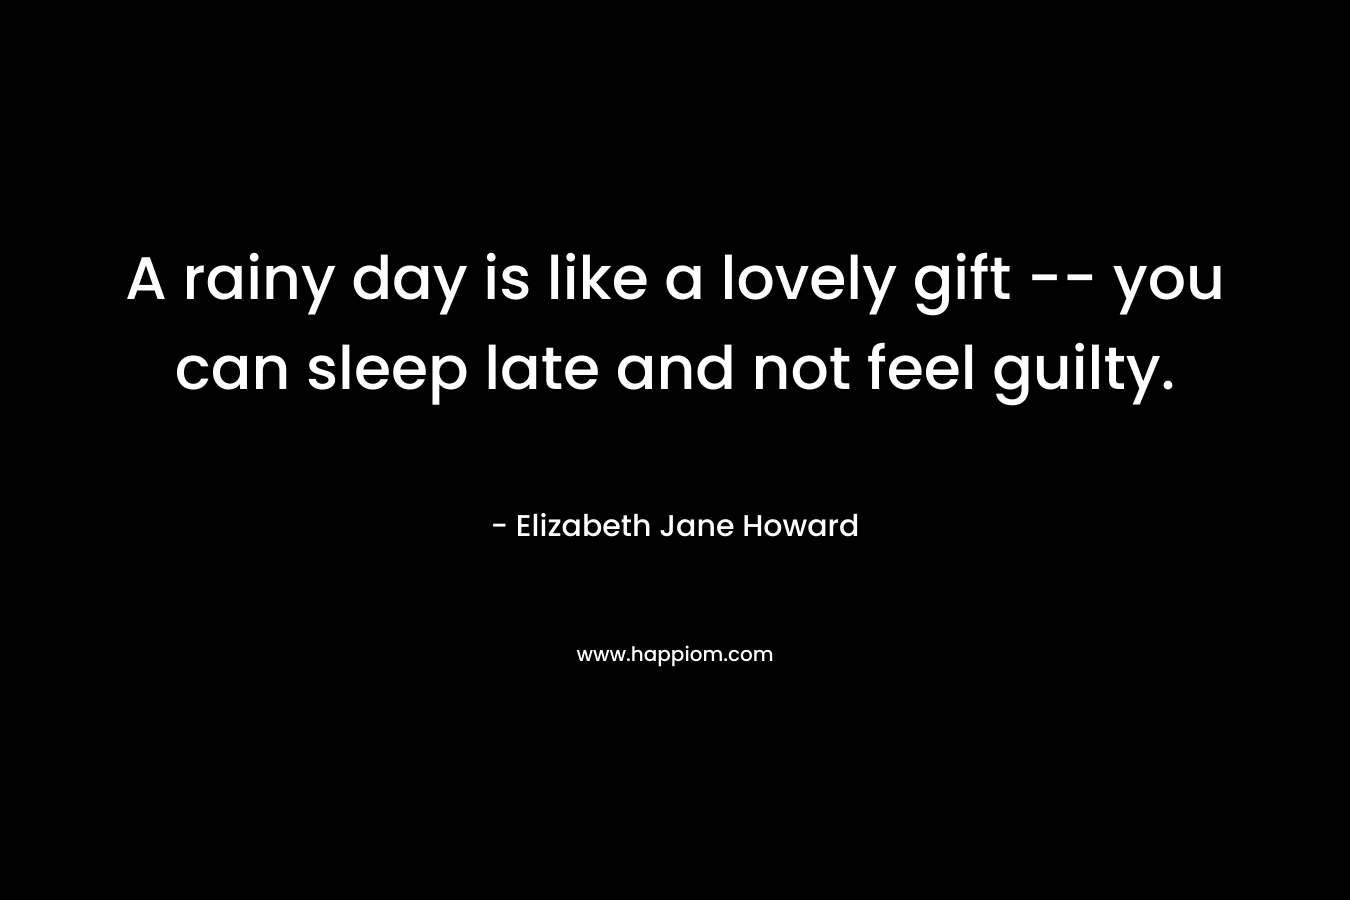 A rainy day is like a lovely gift — you can sleep late and not feel guilty. – Elizabeth Jane Howard